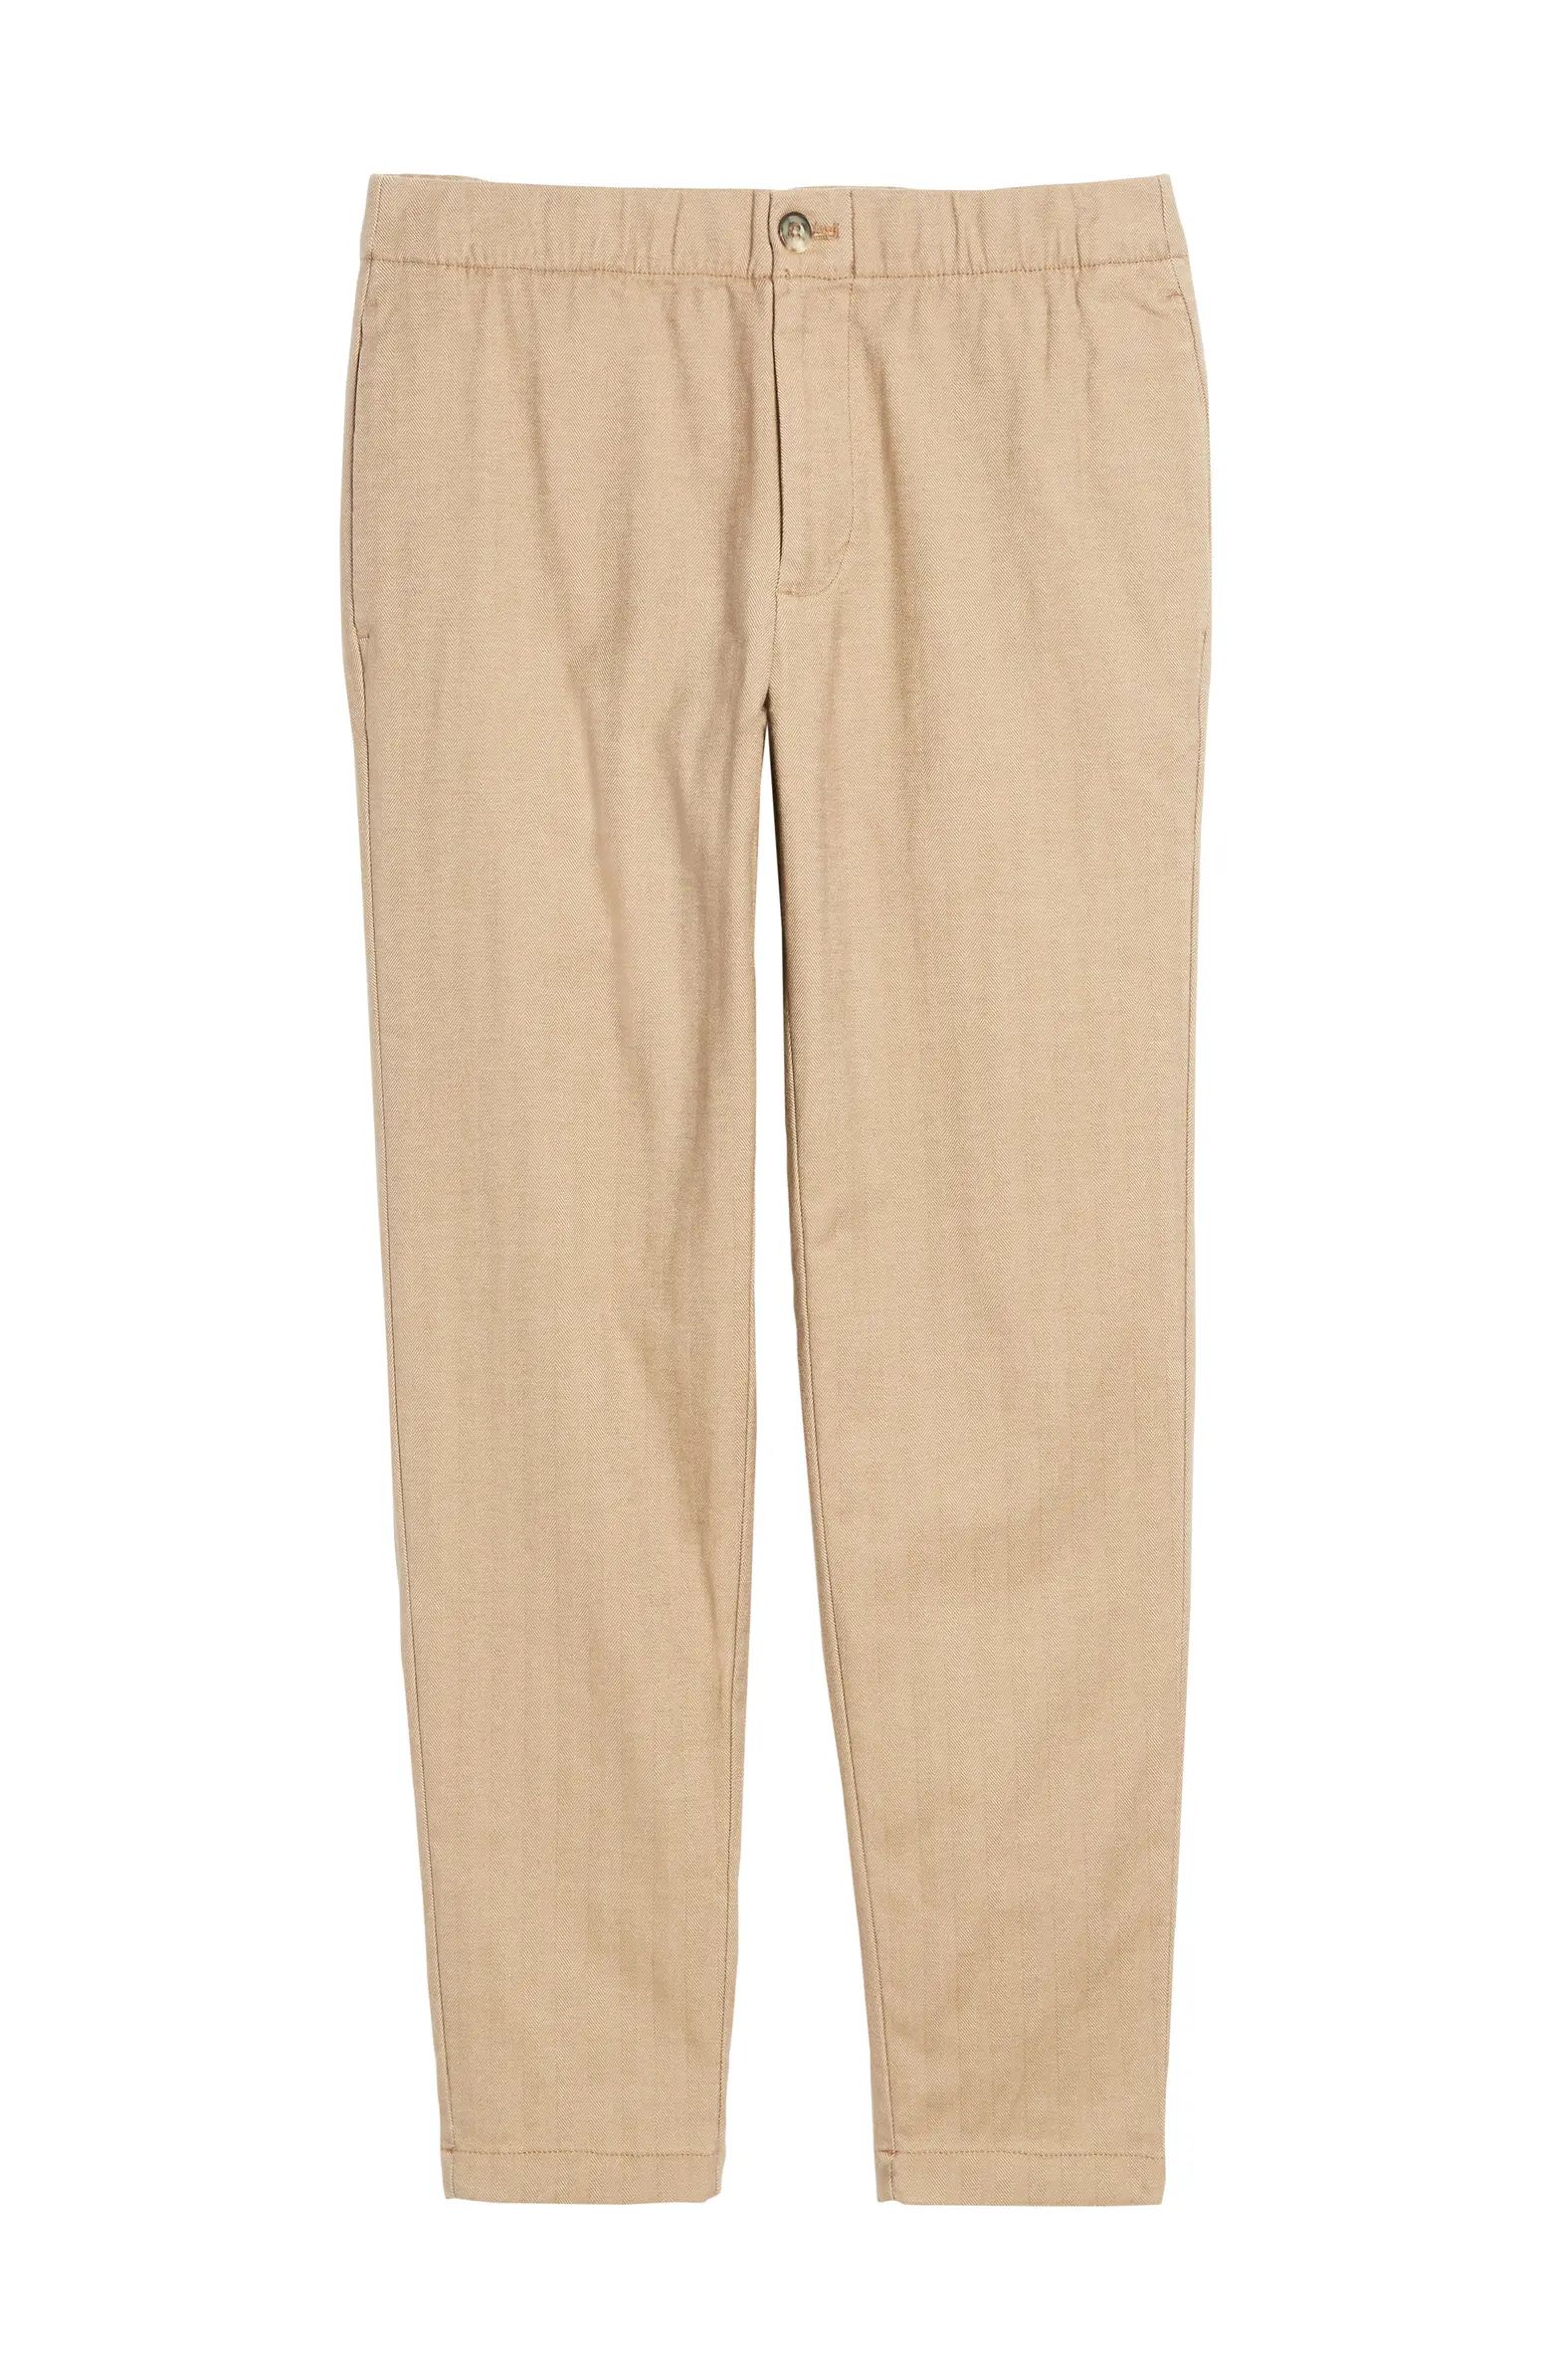 Bonobos Off Duty Yarn Dyed Cotton Blend Pants | Nordstrom | Nordstrom